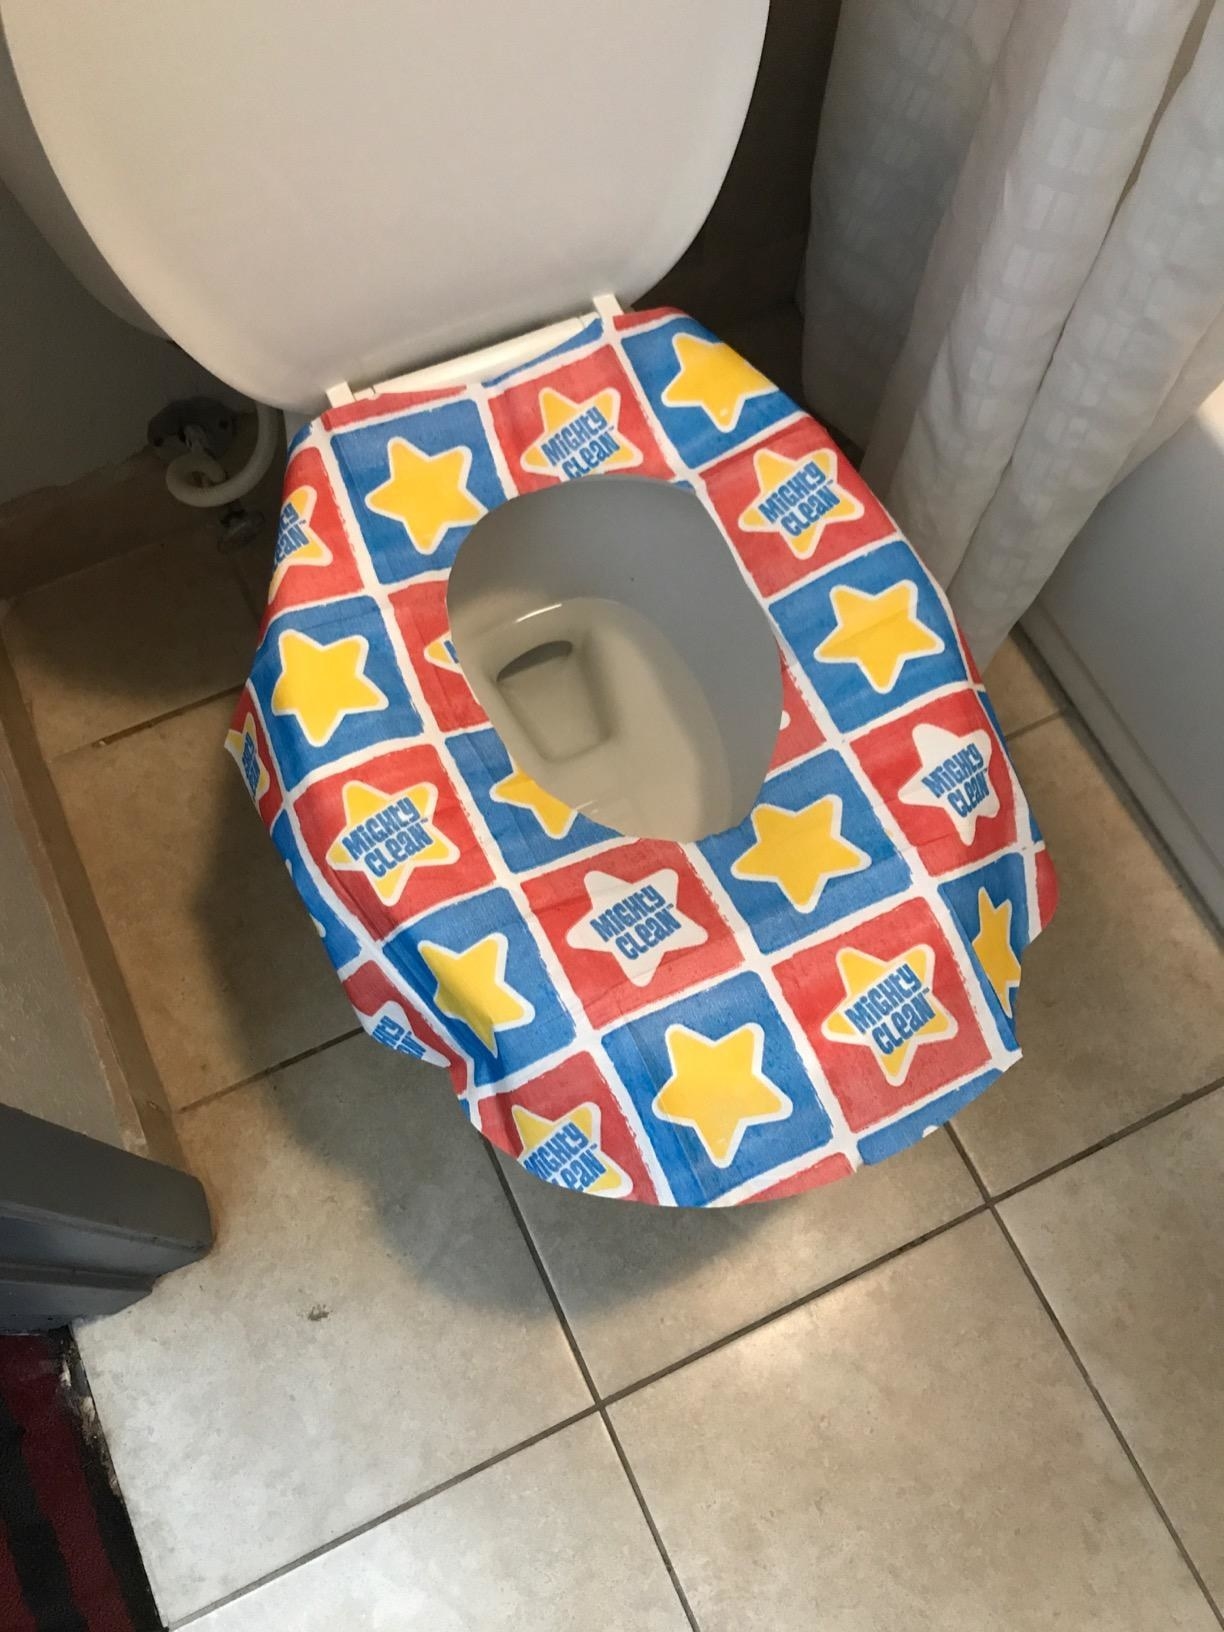 Reviewer's photo showing the seat cover on a toilet